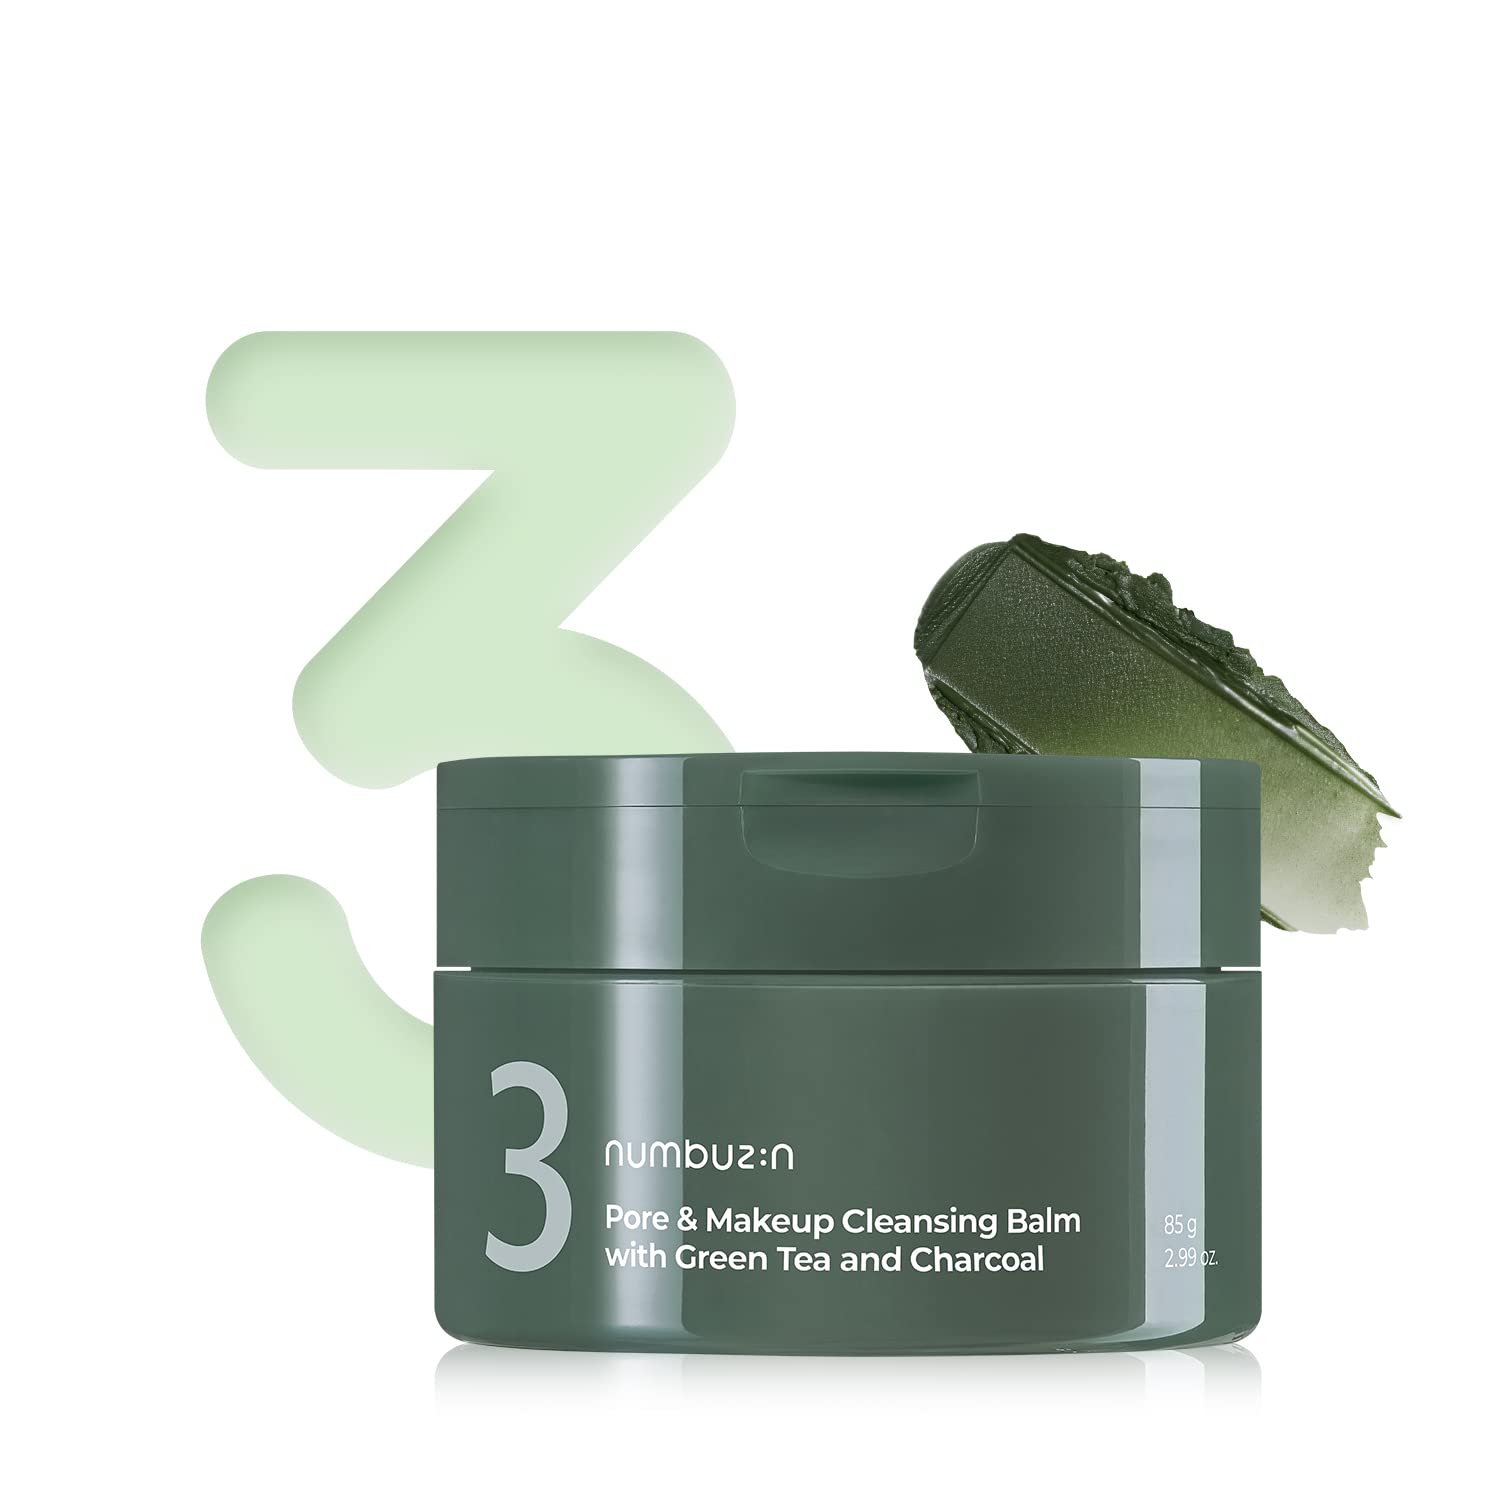 numbuz:n No.3 Pore & Makeup Cleansing Balm with Green Tea and Charcoal 85g / 2.99 oz. - image 1 of 6